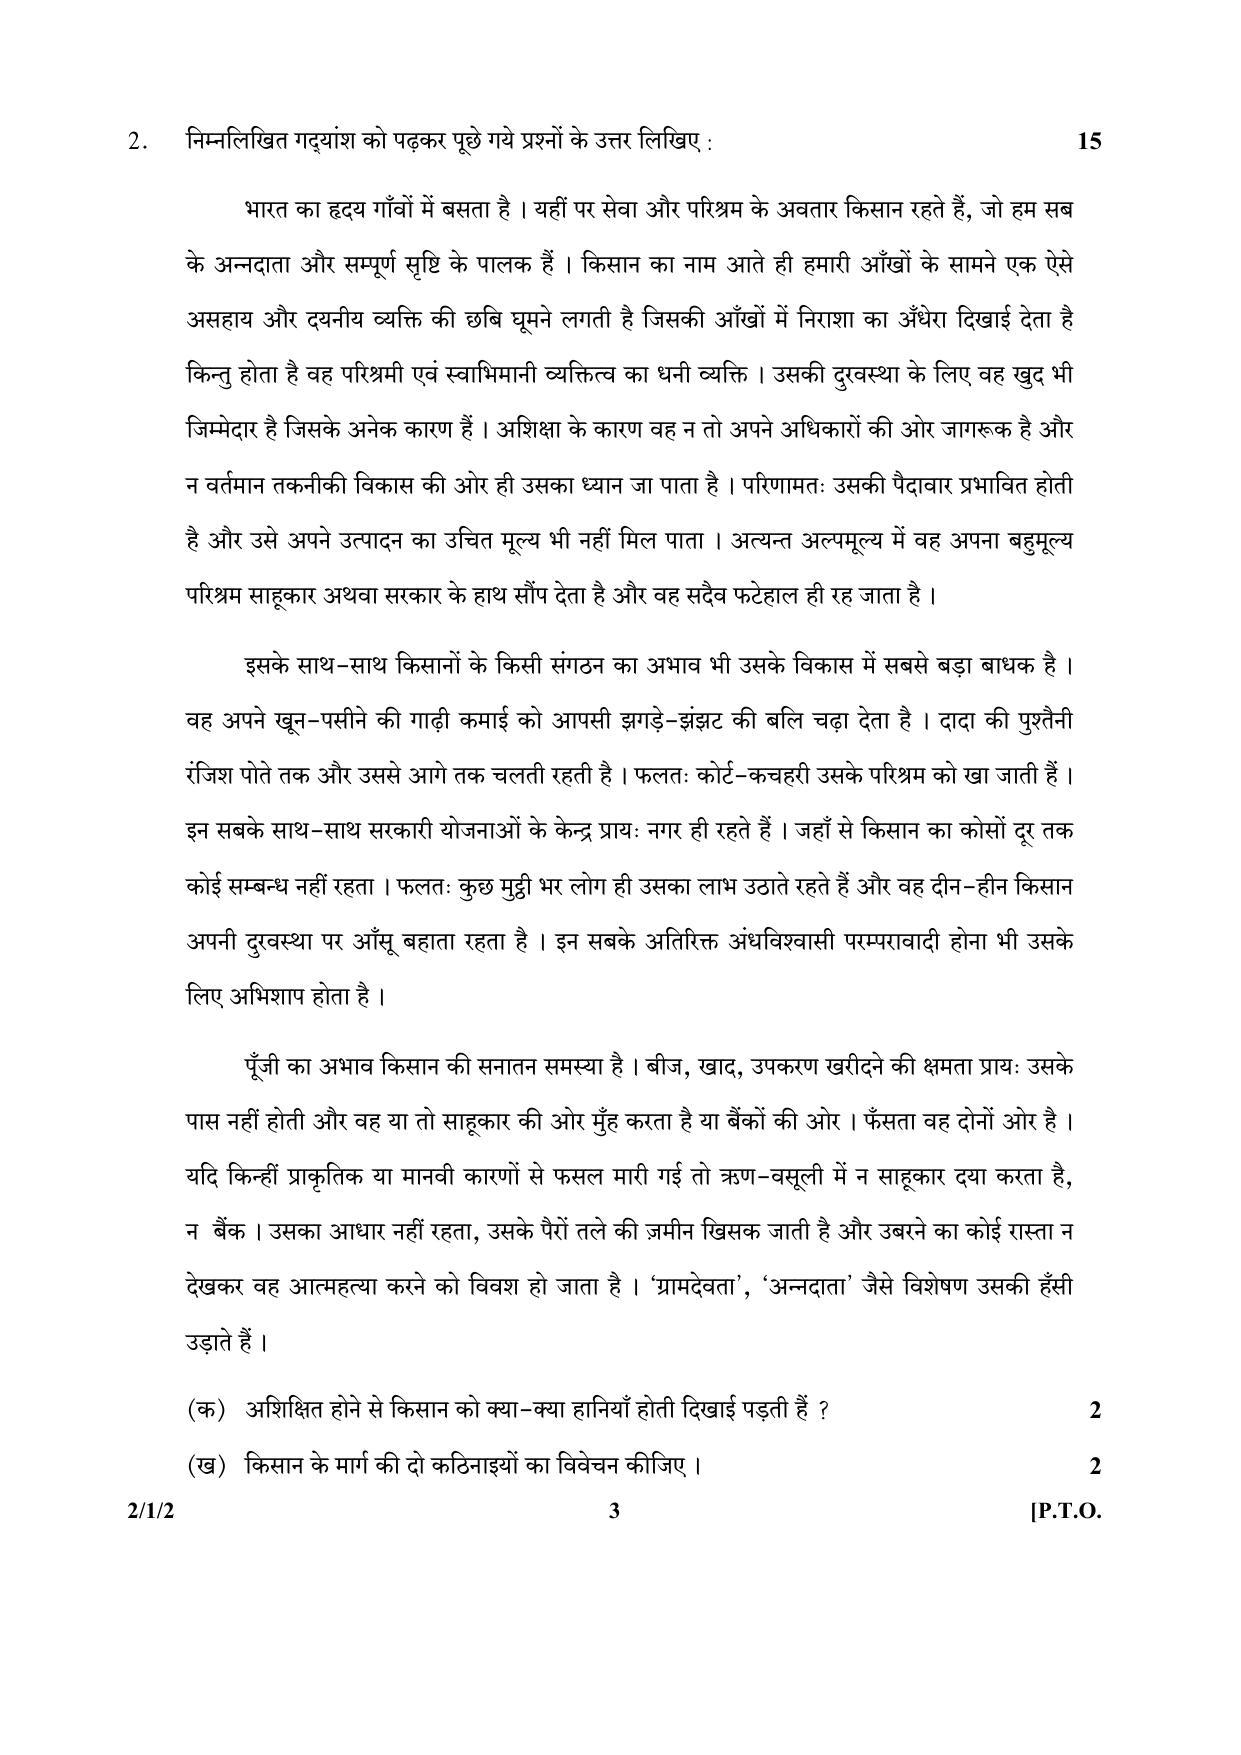 CBSE Class 12 2-1-2 (Hindi) 2017-comptt Question Paper - Page 3